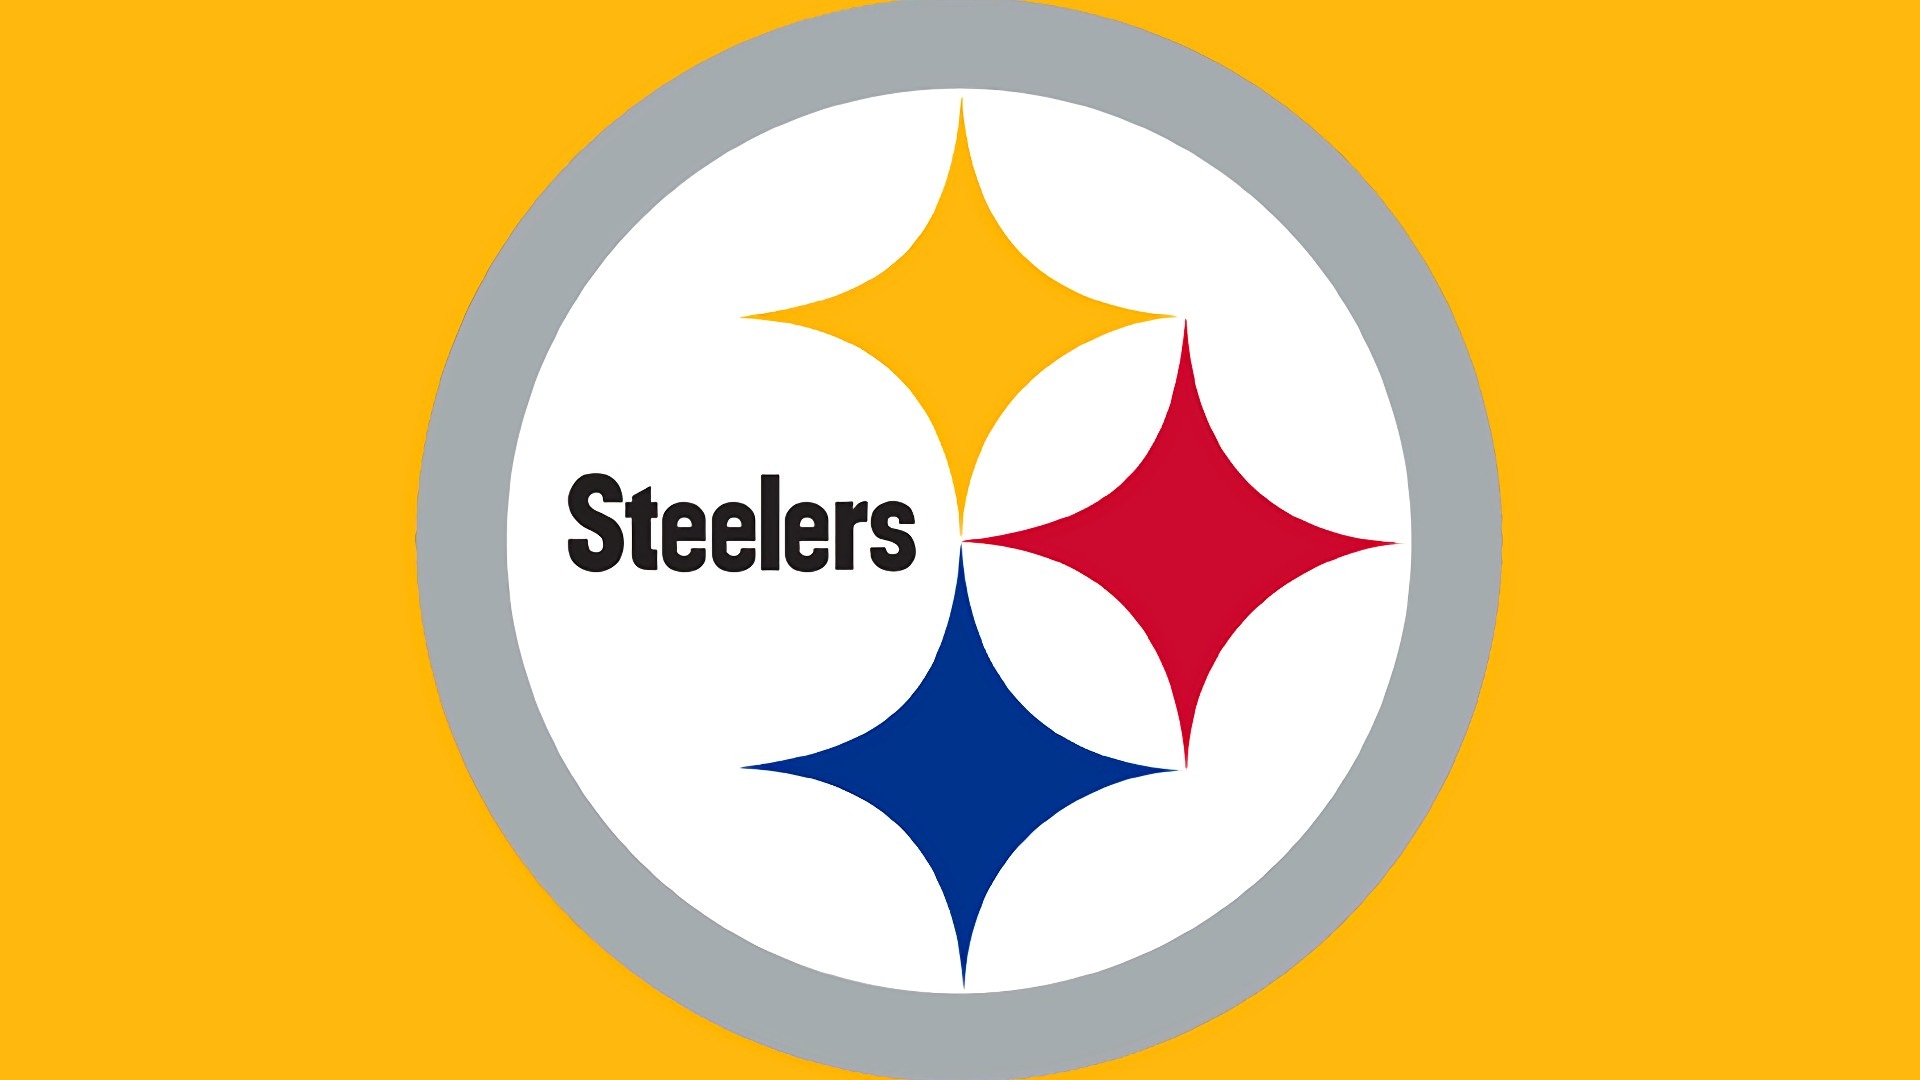 Steelers Logo Wallpaper with resolution 1920x1080 pixel. You can make this wallpaper for your Mac or Windows Desktop Background, iPhone, Android or Tablet and another Smartphone device